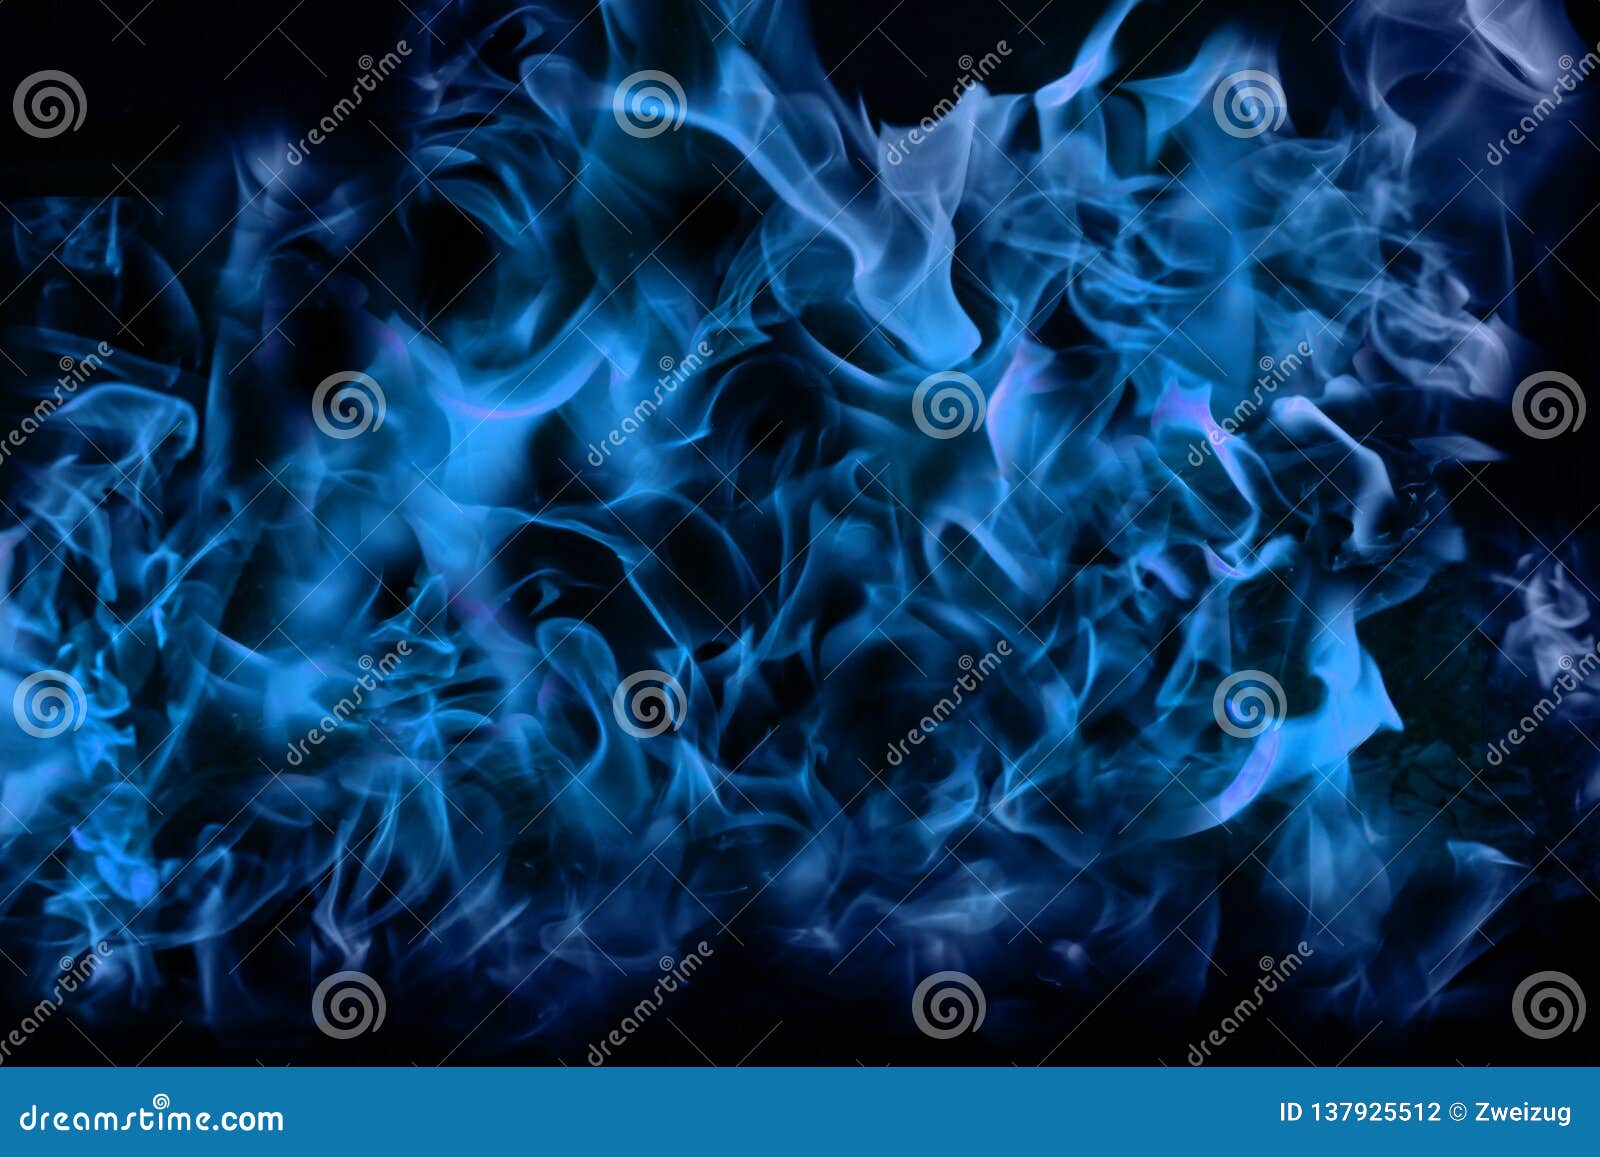 blue flame fire conceptual abstract texture background